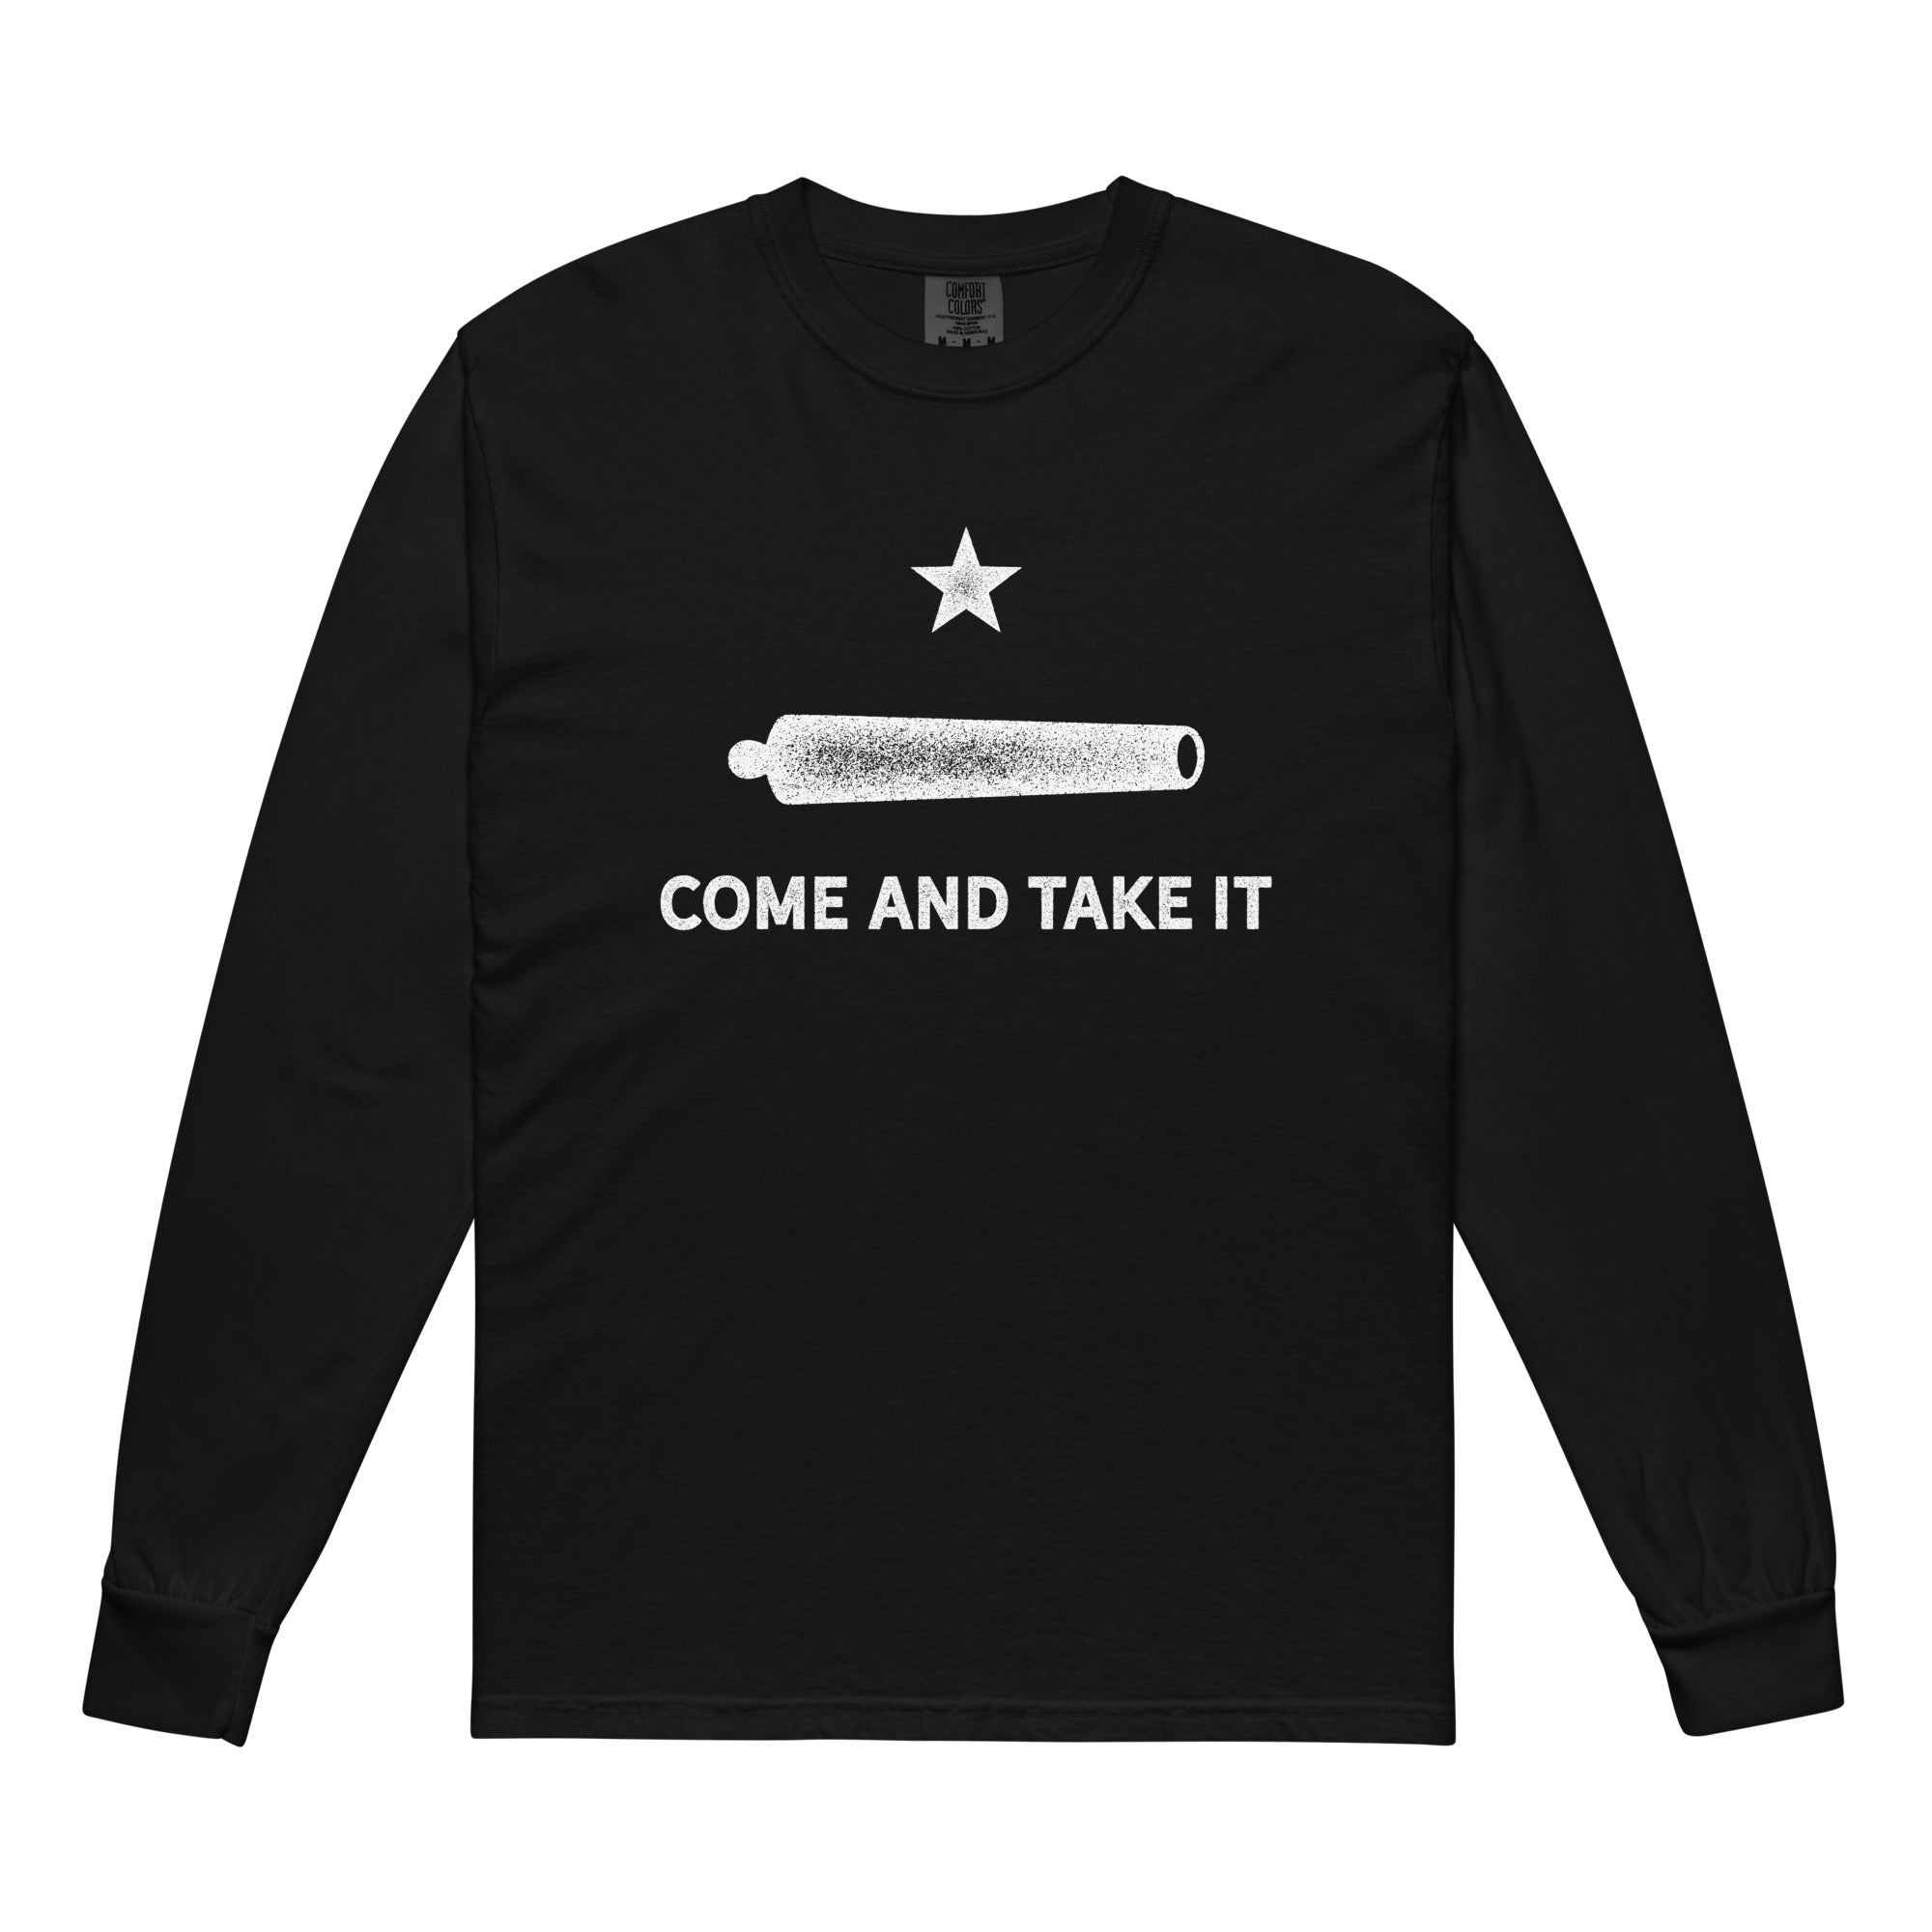 Gonzalez Come and Take It Garment-dyed heavyweight long-sleeve shirt